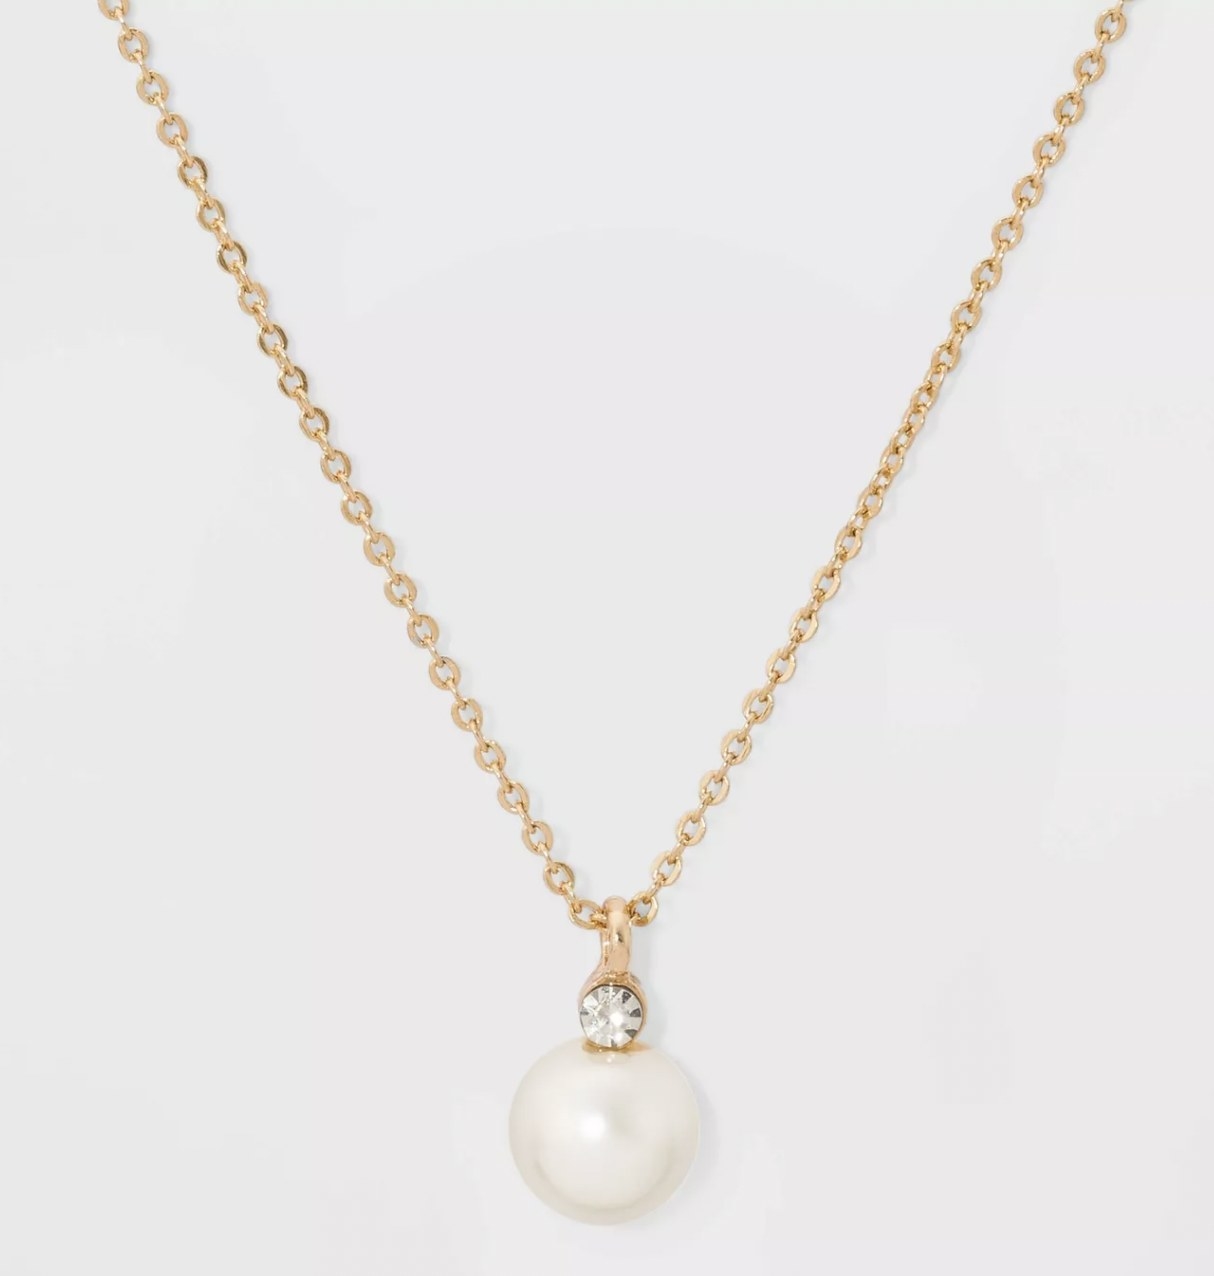 a gold chain with a pearl pendant and a small gemstone